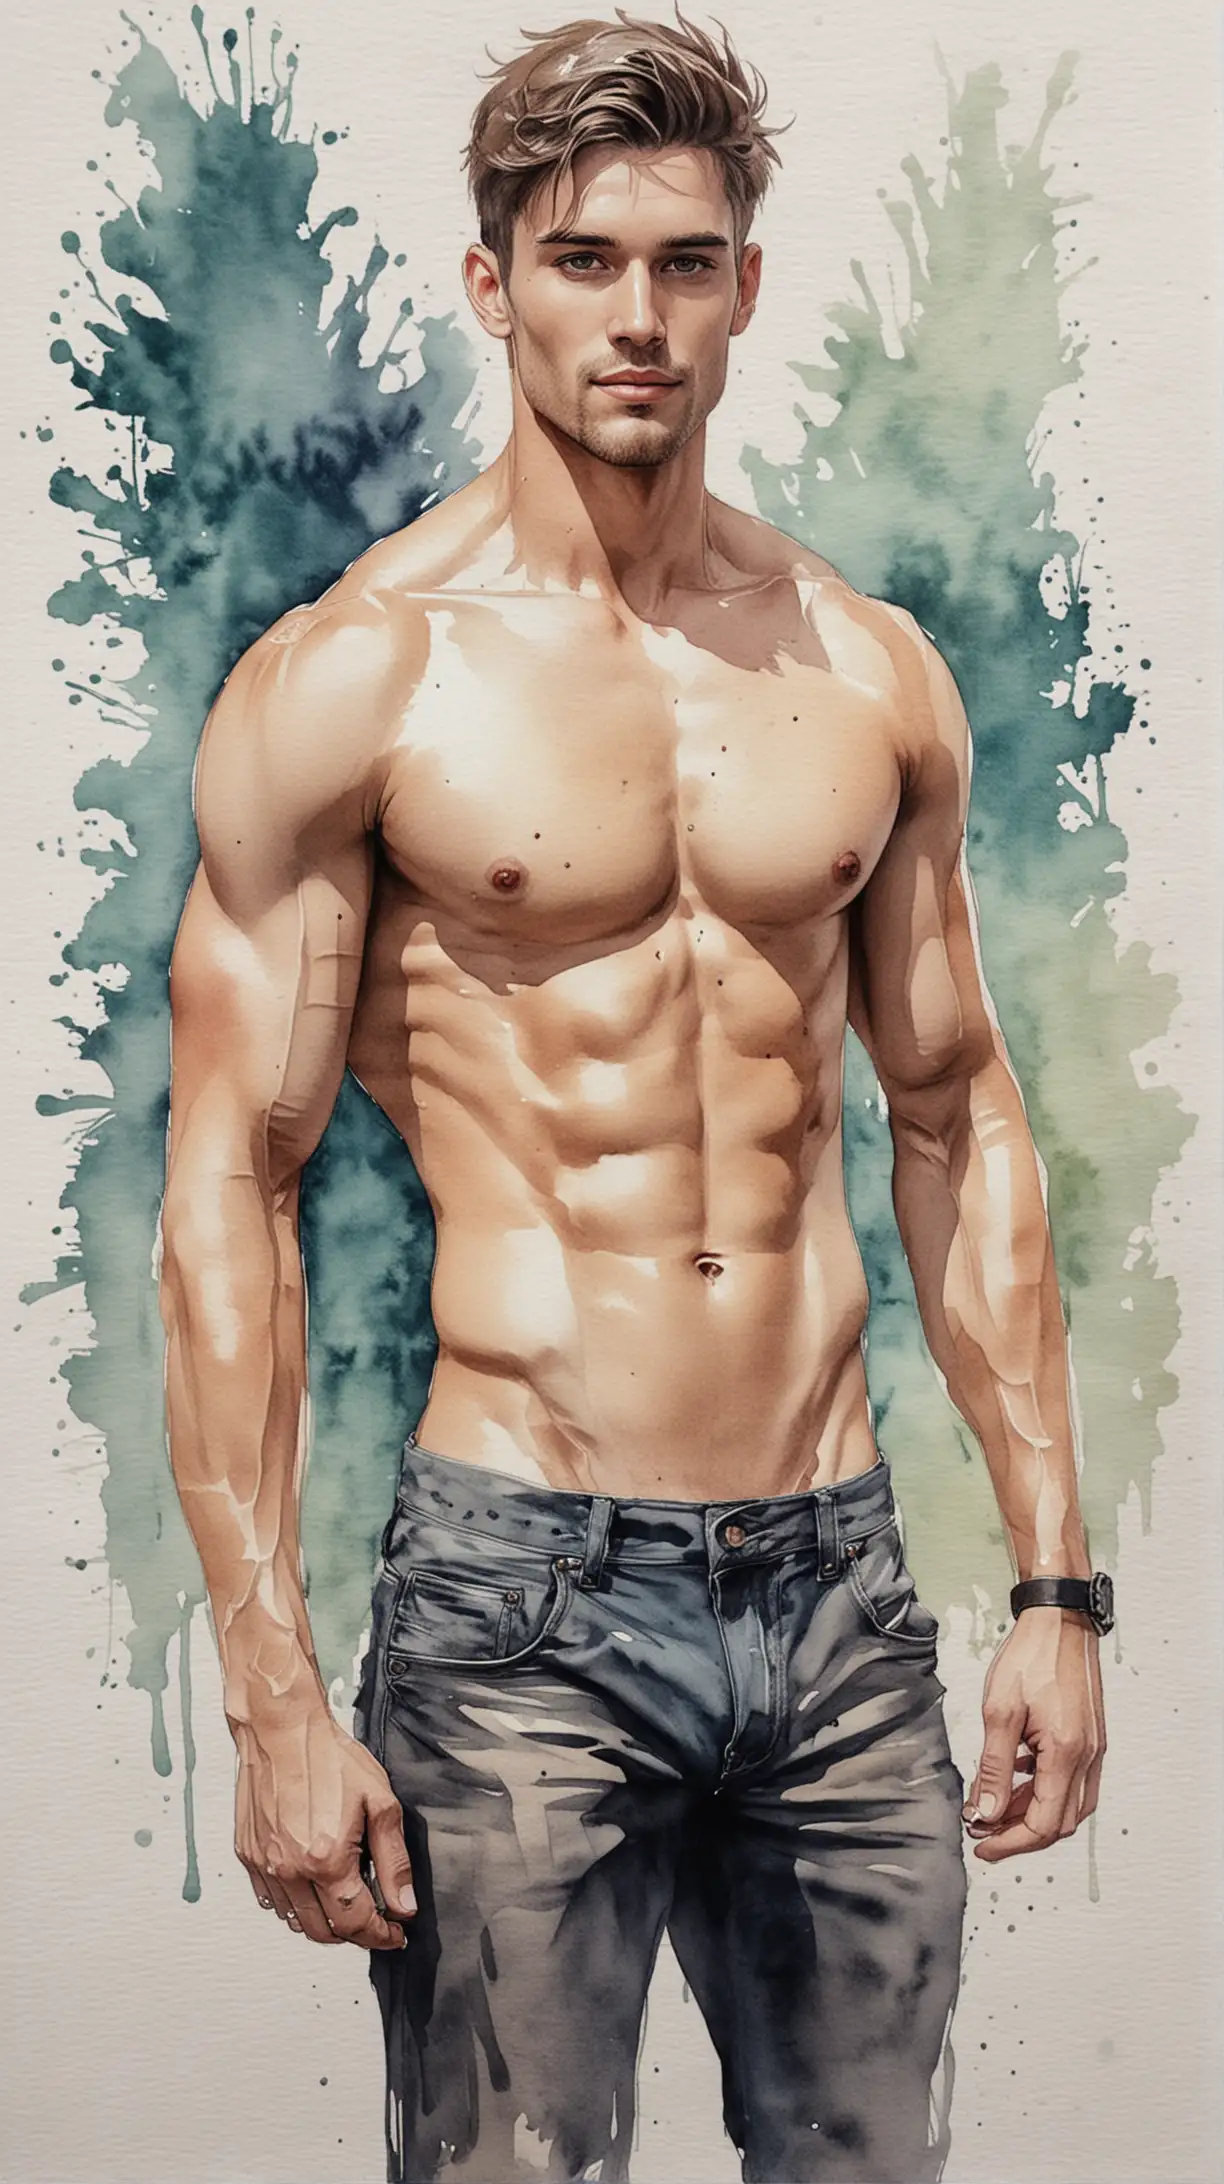 Encounter with the Ideal Self Handsome Male Portrait in Watercolor and Strong Inks